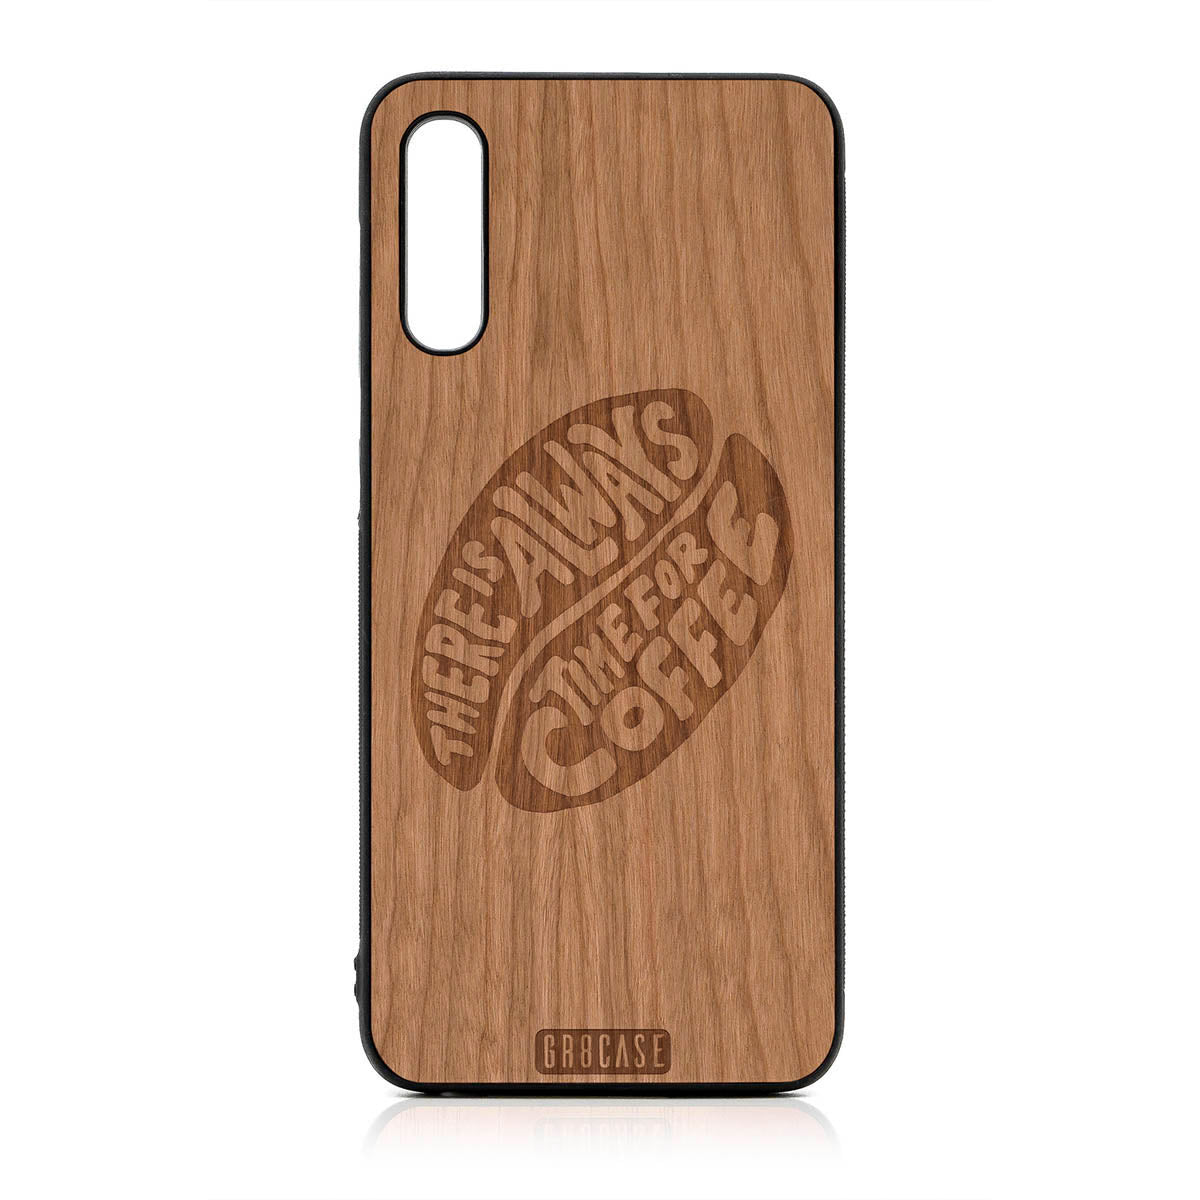 There Is Always Time For Coffee Design Wood Case For Samsung Galaxy A50